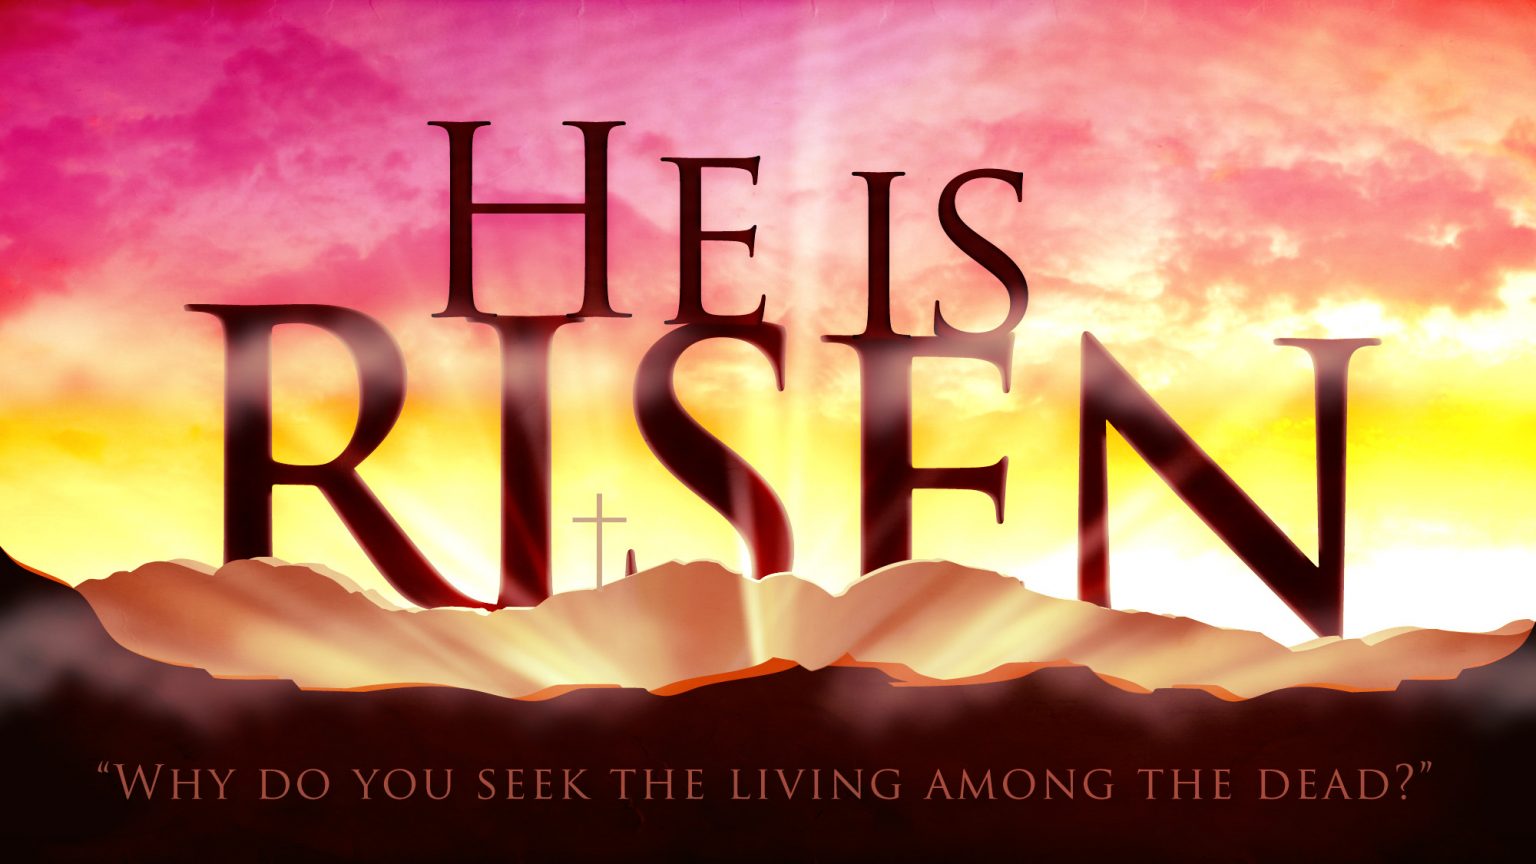 Risen download the new version